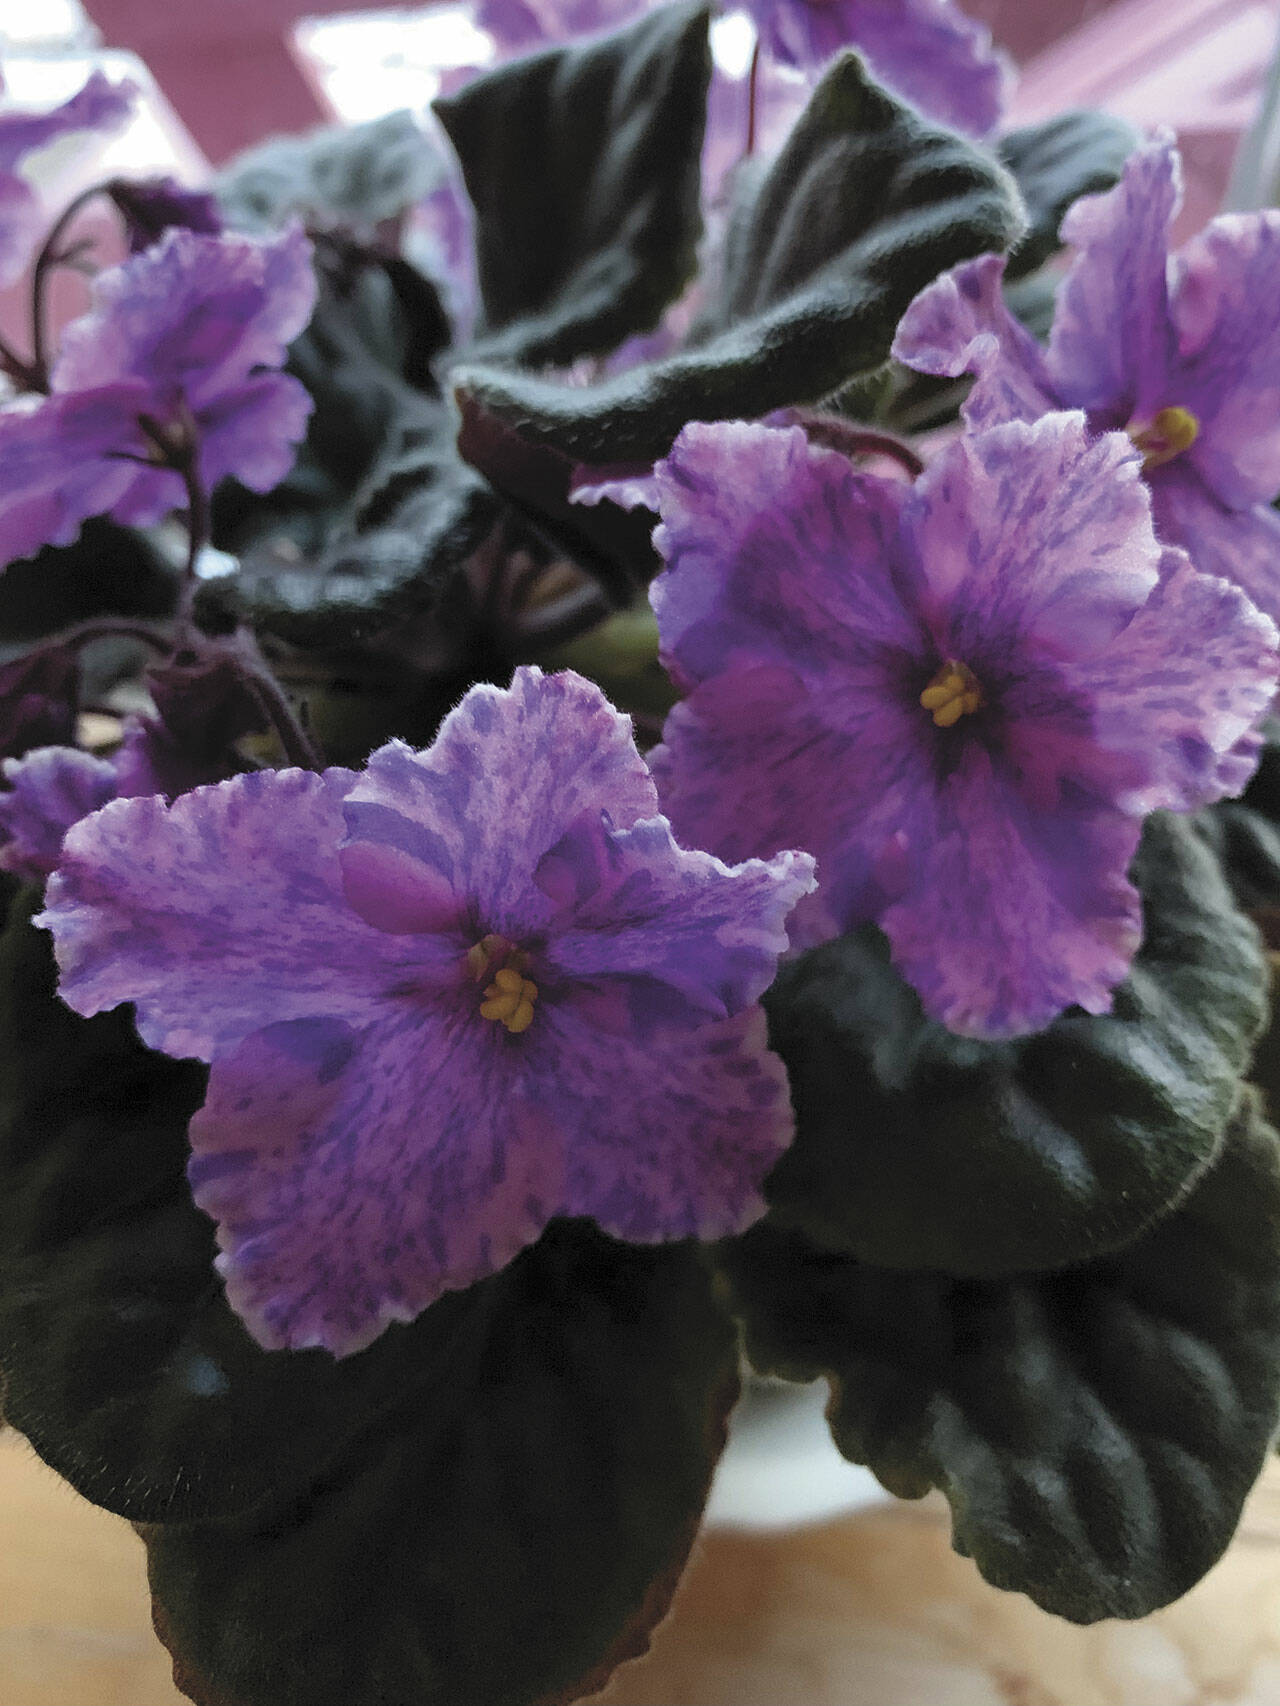 Photo by Rosemary Fitzpatrick
African violets are the topic of discussion at 10 a.m. at the Sequim Prairie Garden Club’s meeting on Oct. 3. The public is invited.